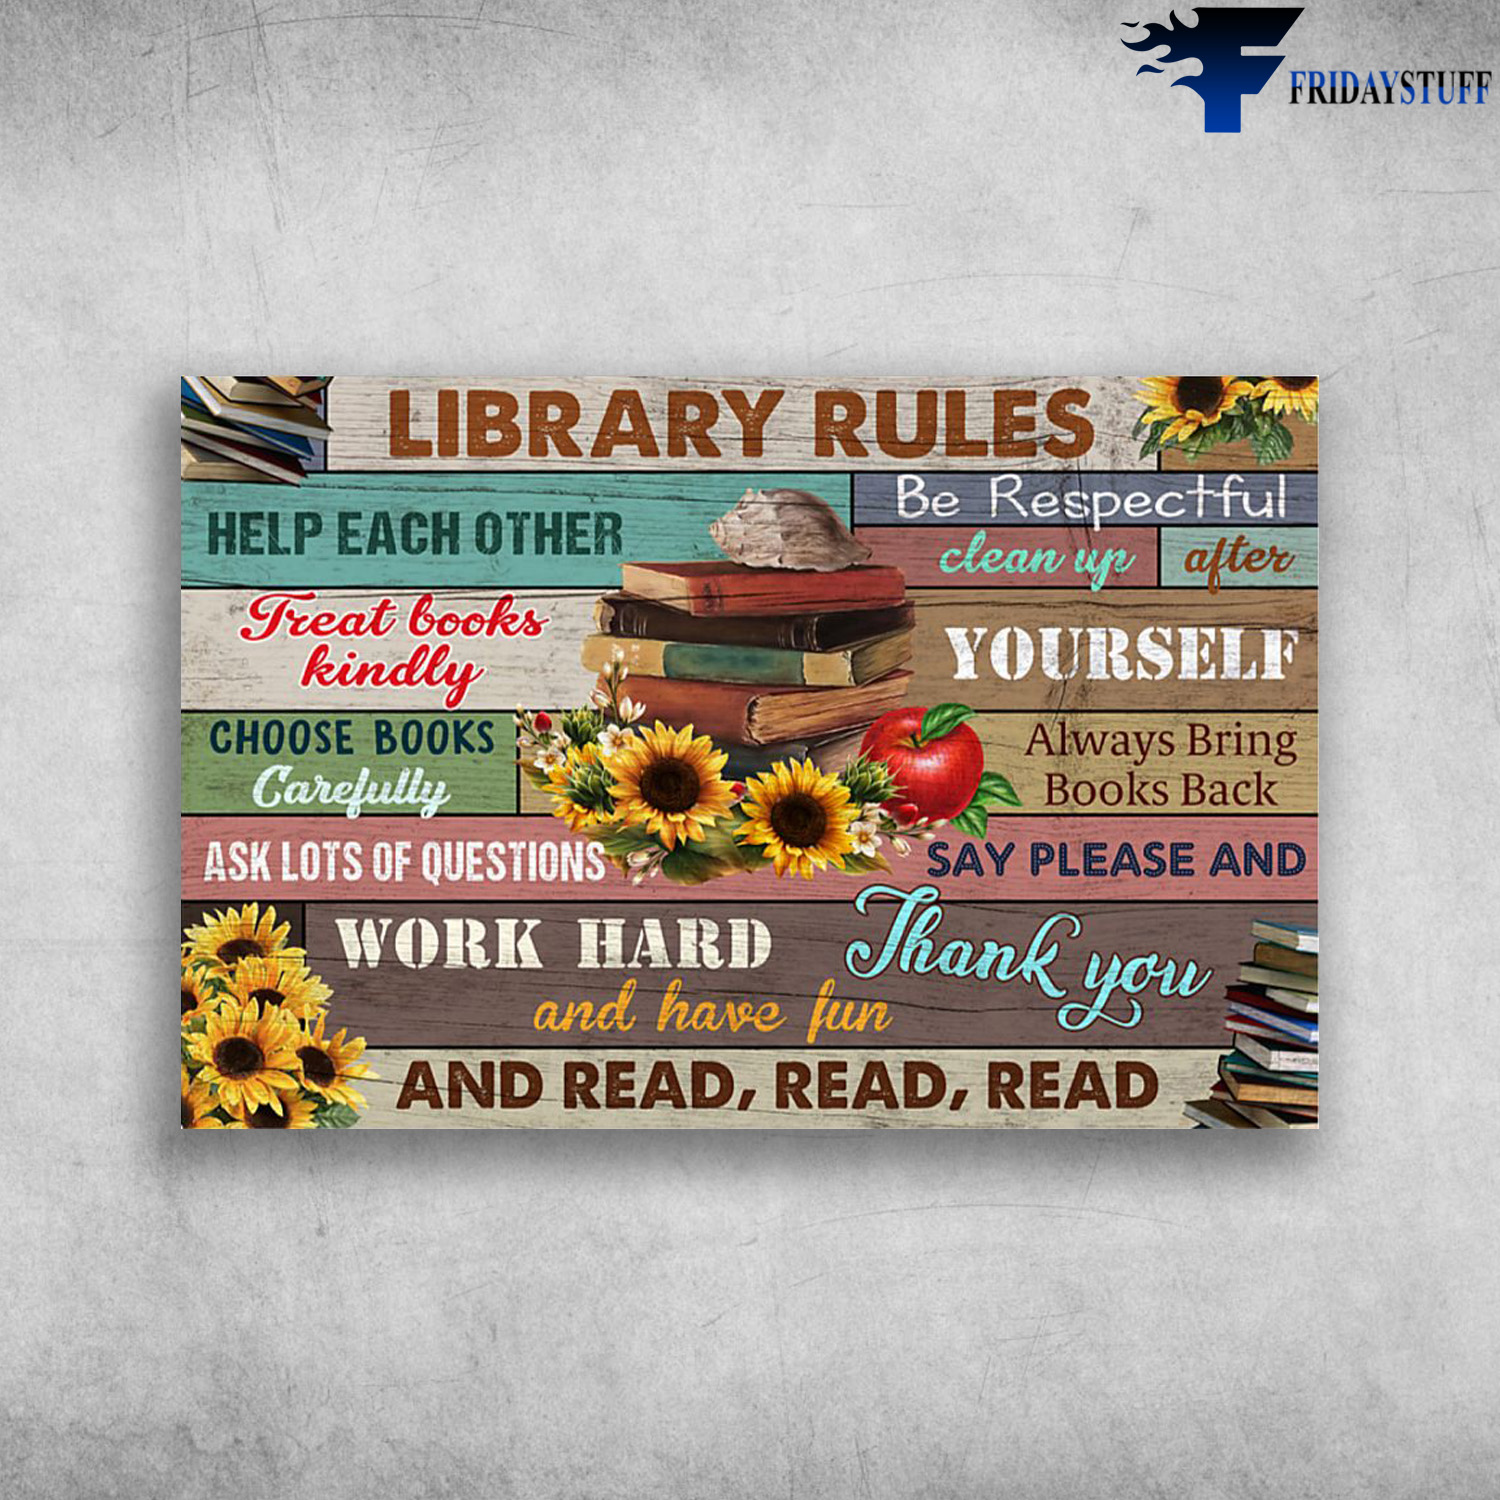 Libarary Rules - Be Respectful, Help Each Other, Clean Up After Yourself, Treat Books Kindly, Choose Books Carefully, Always Bring Books Back, Ask Lots Of Questions, Say Please And Thank You, Work Hard And Have Fun, And Read Read Read